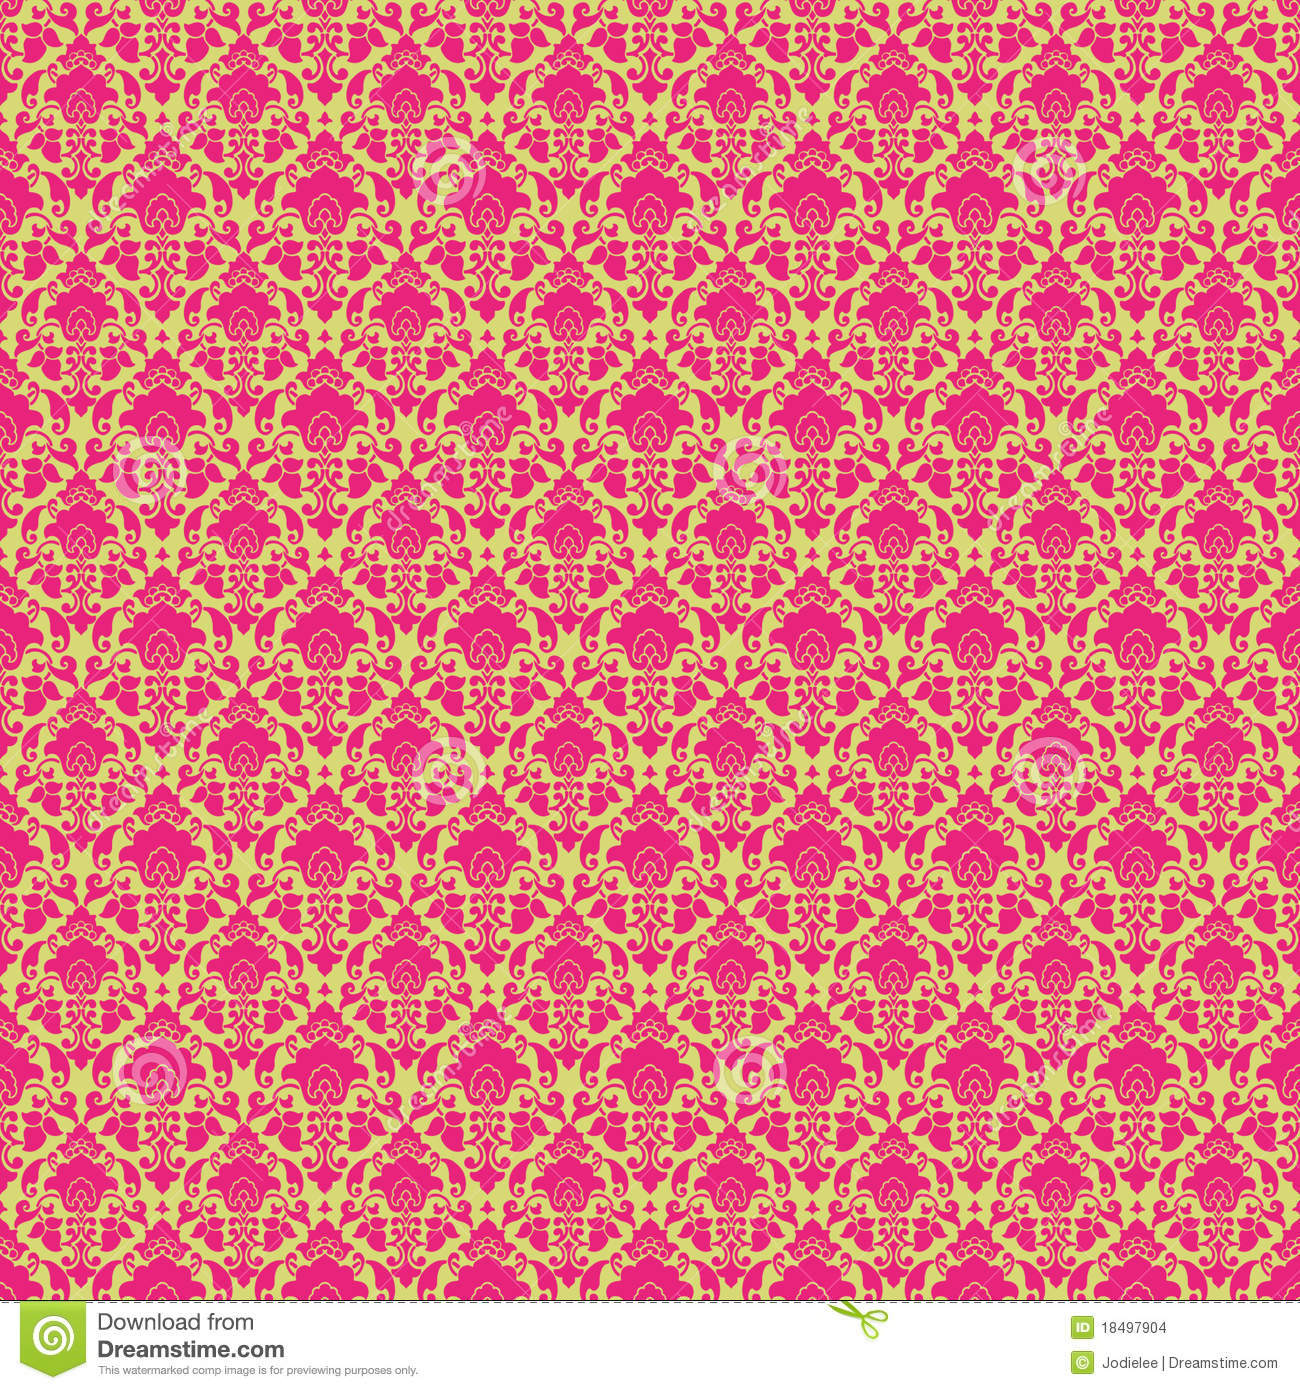 Home Search Results For Pink Damask Wallpaper Query